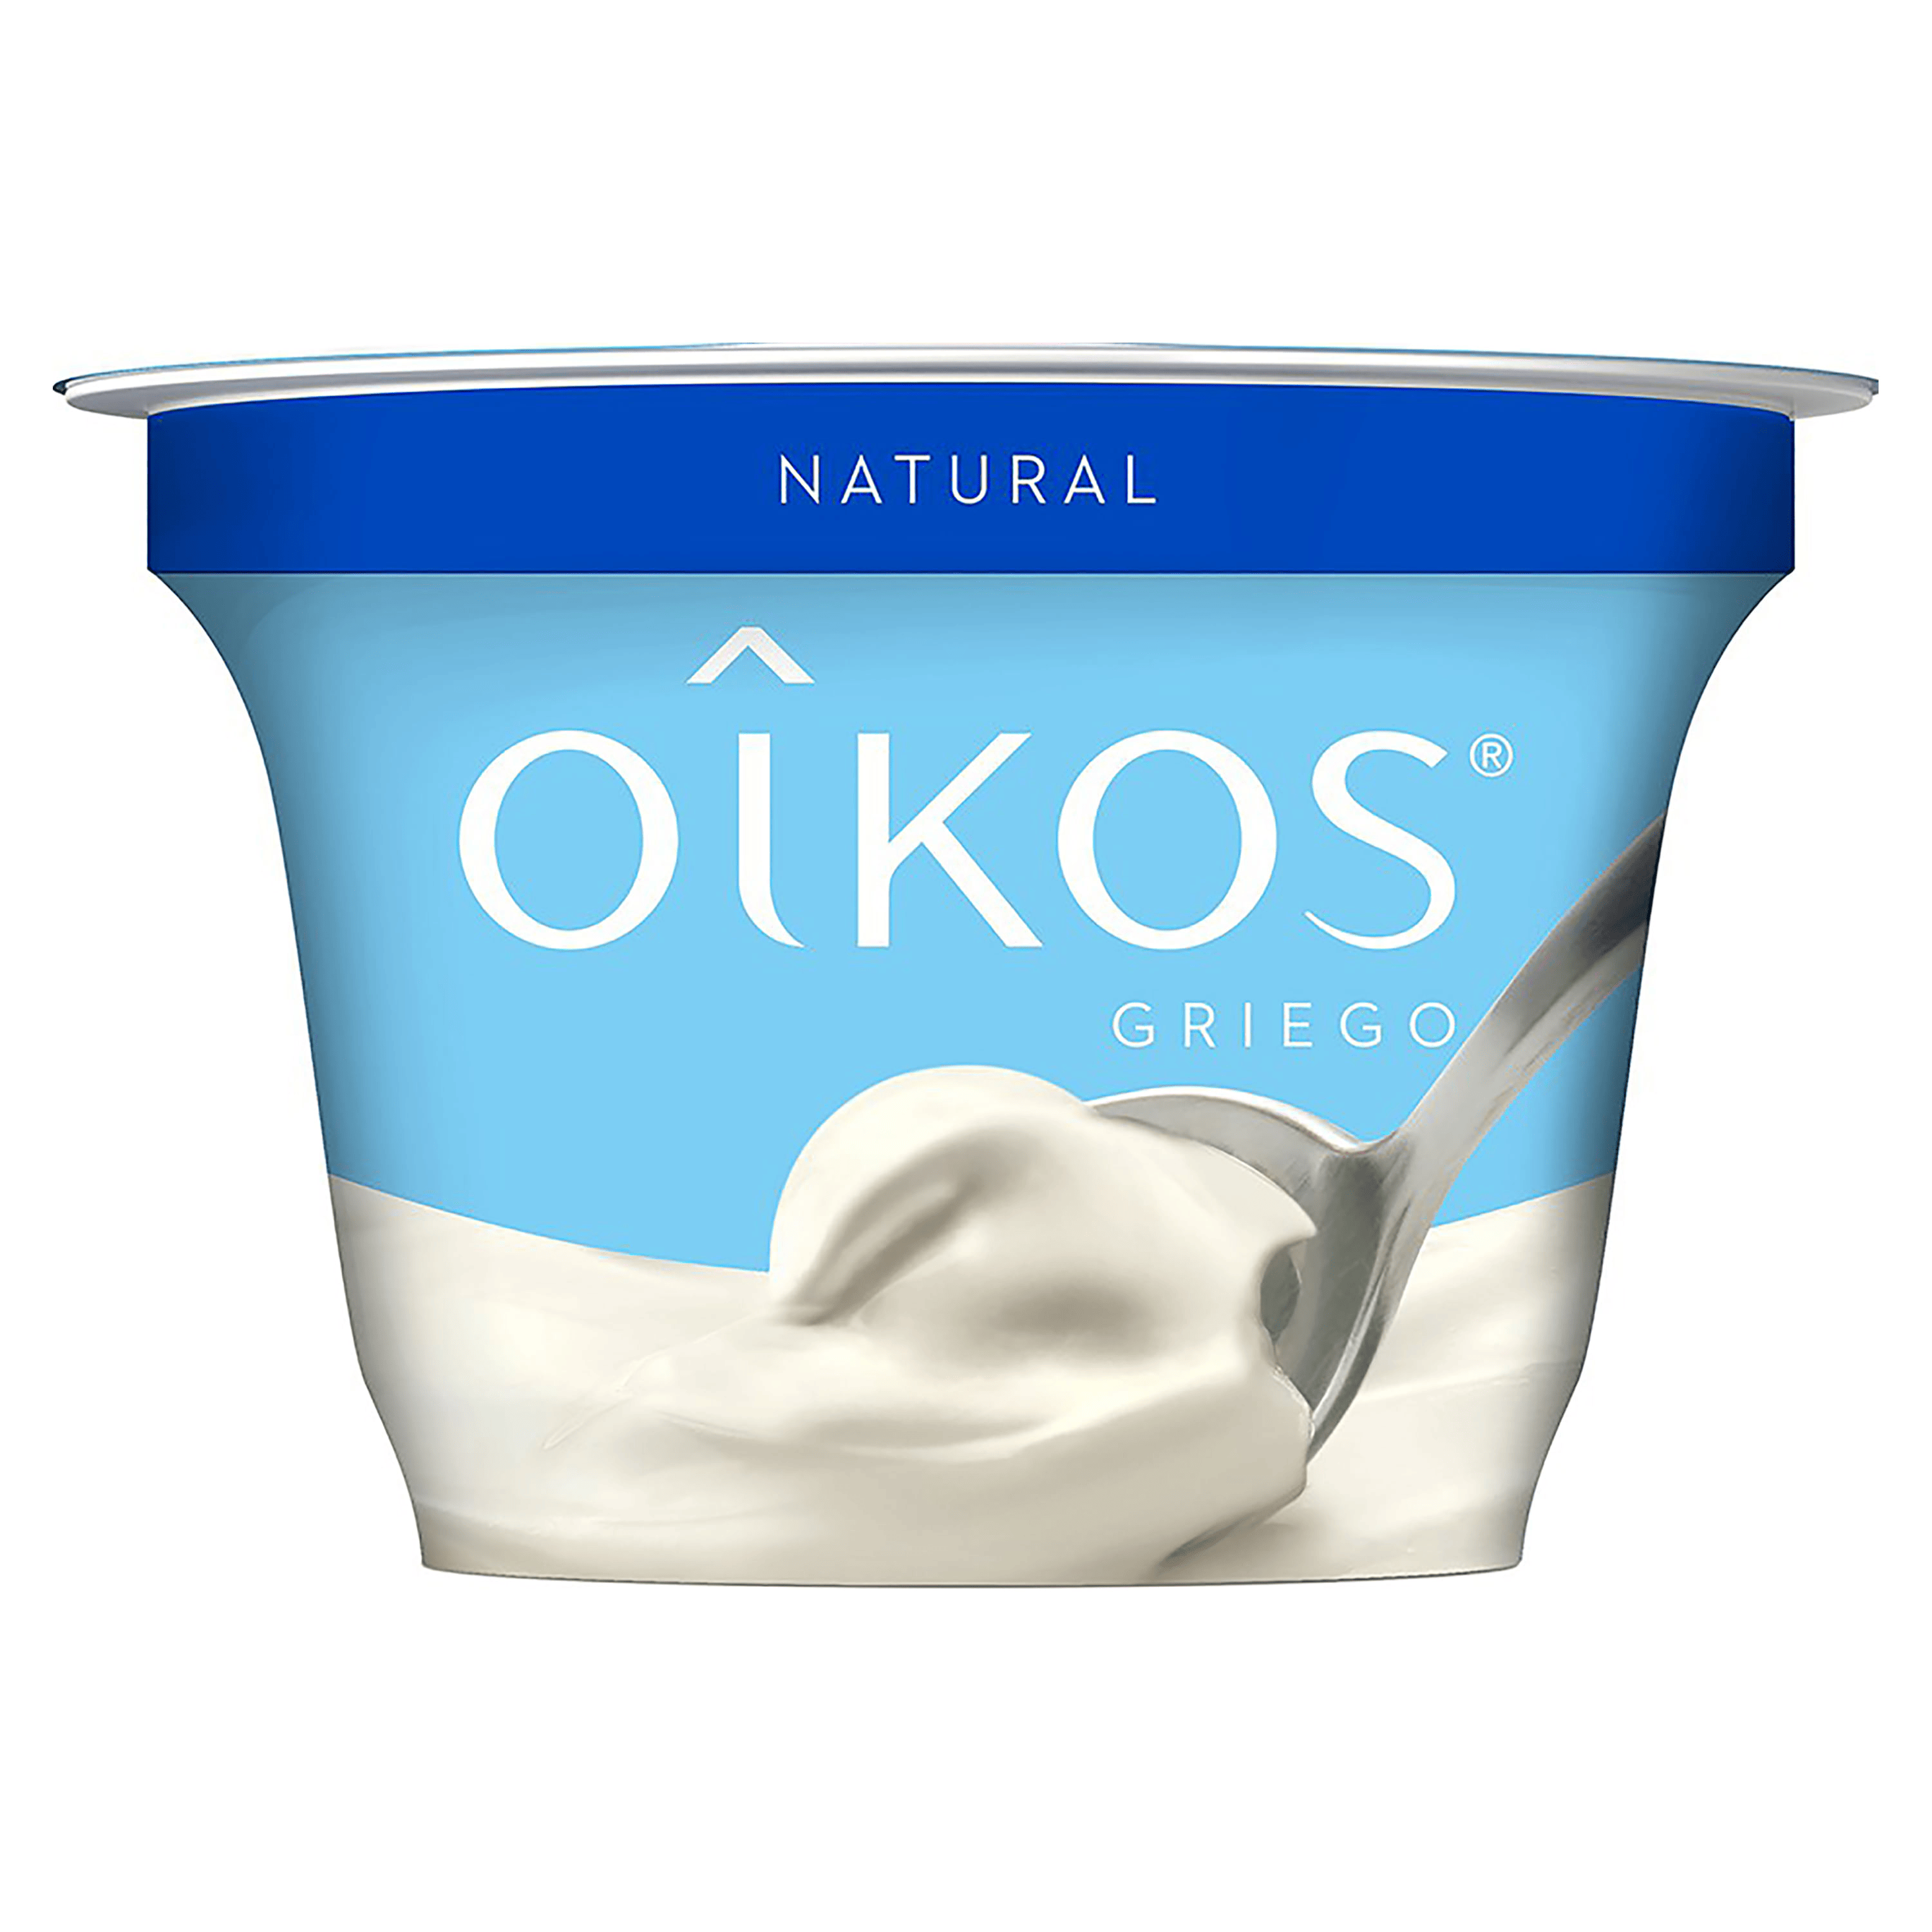 DANONE OIKOS NATURAL 150GRS